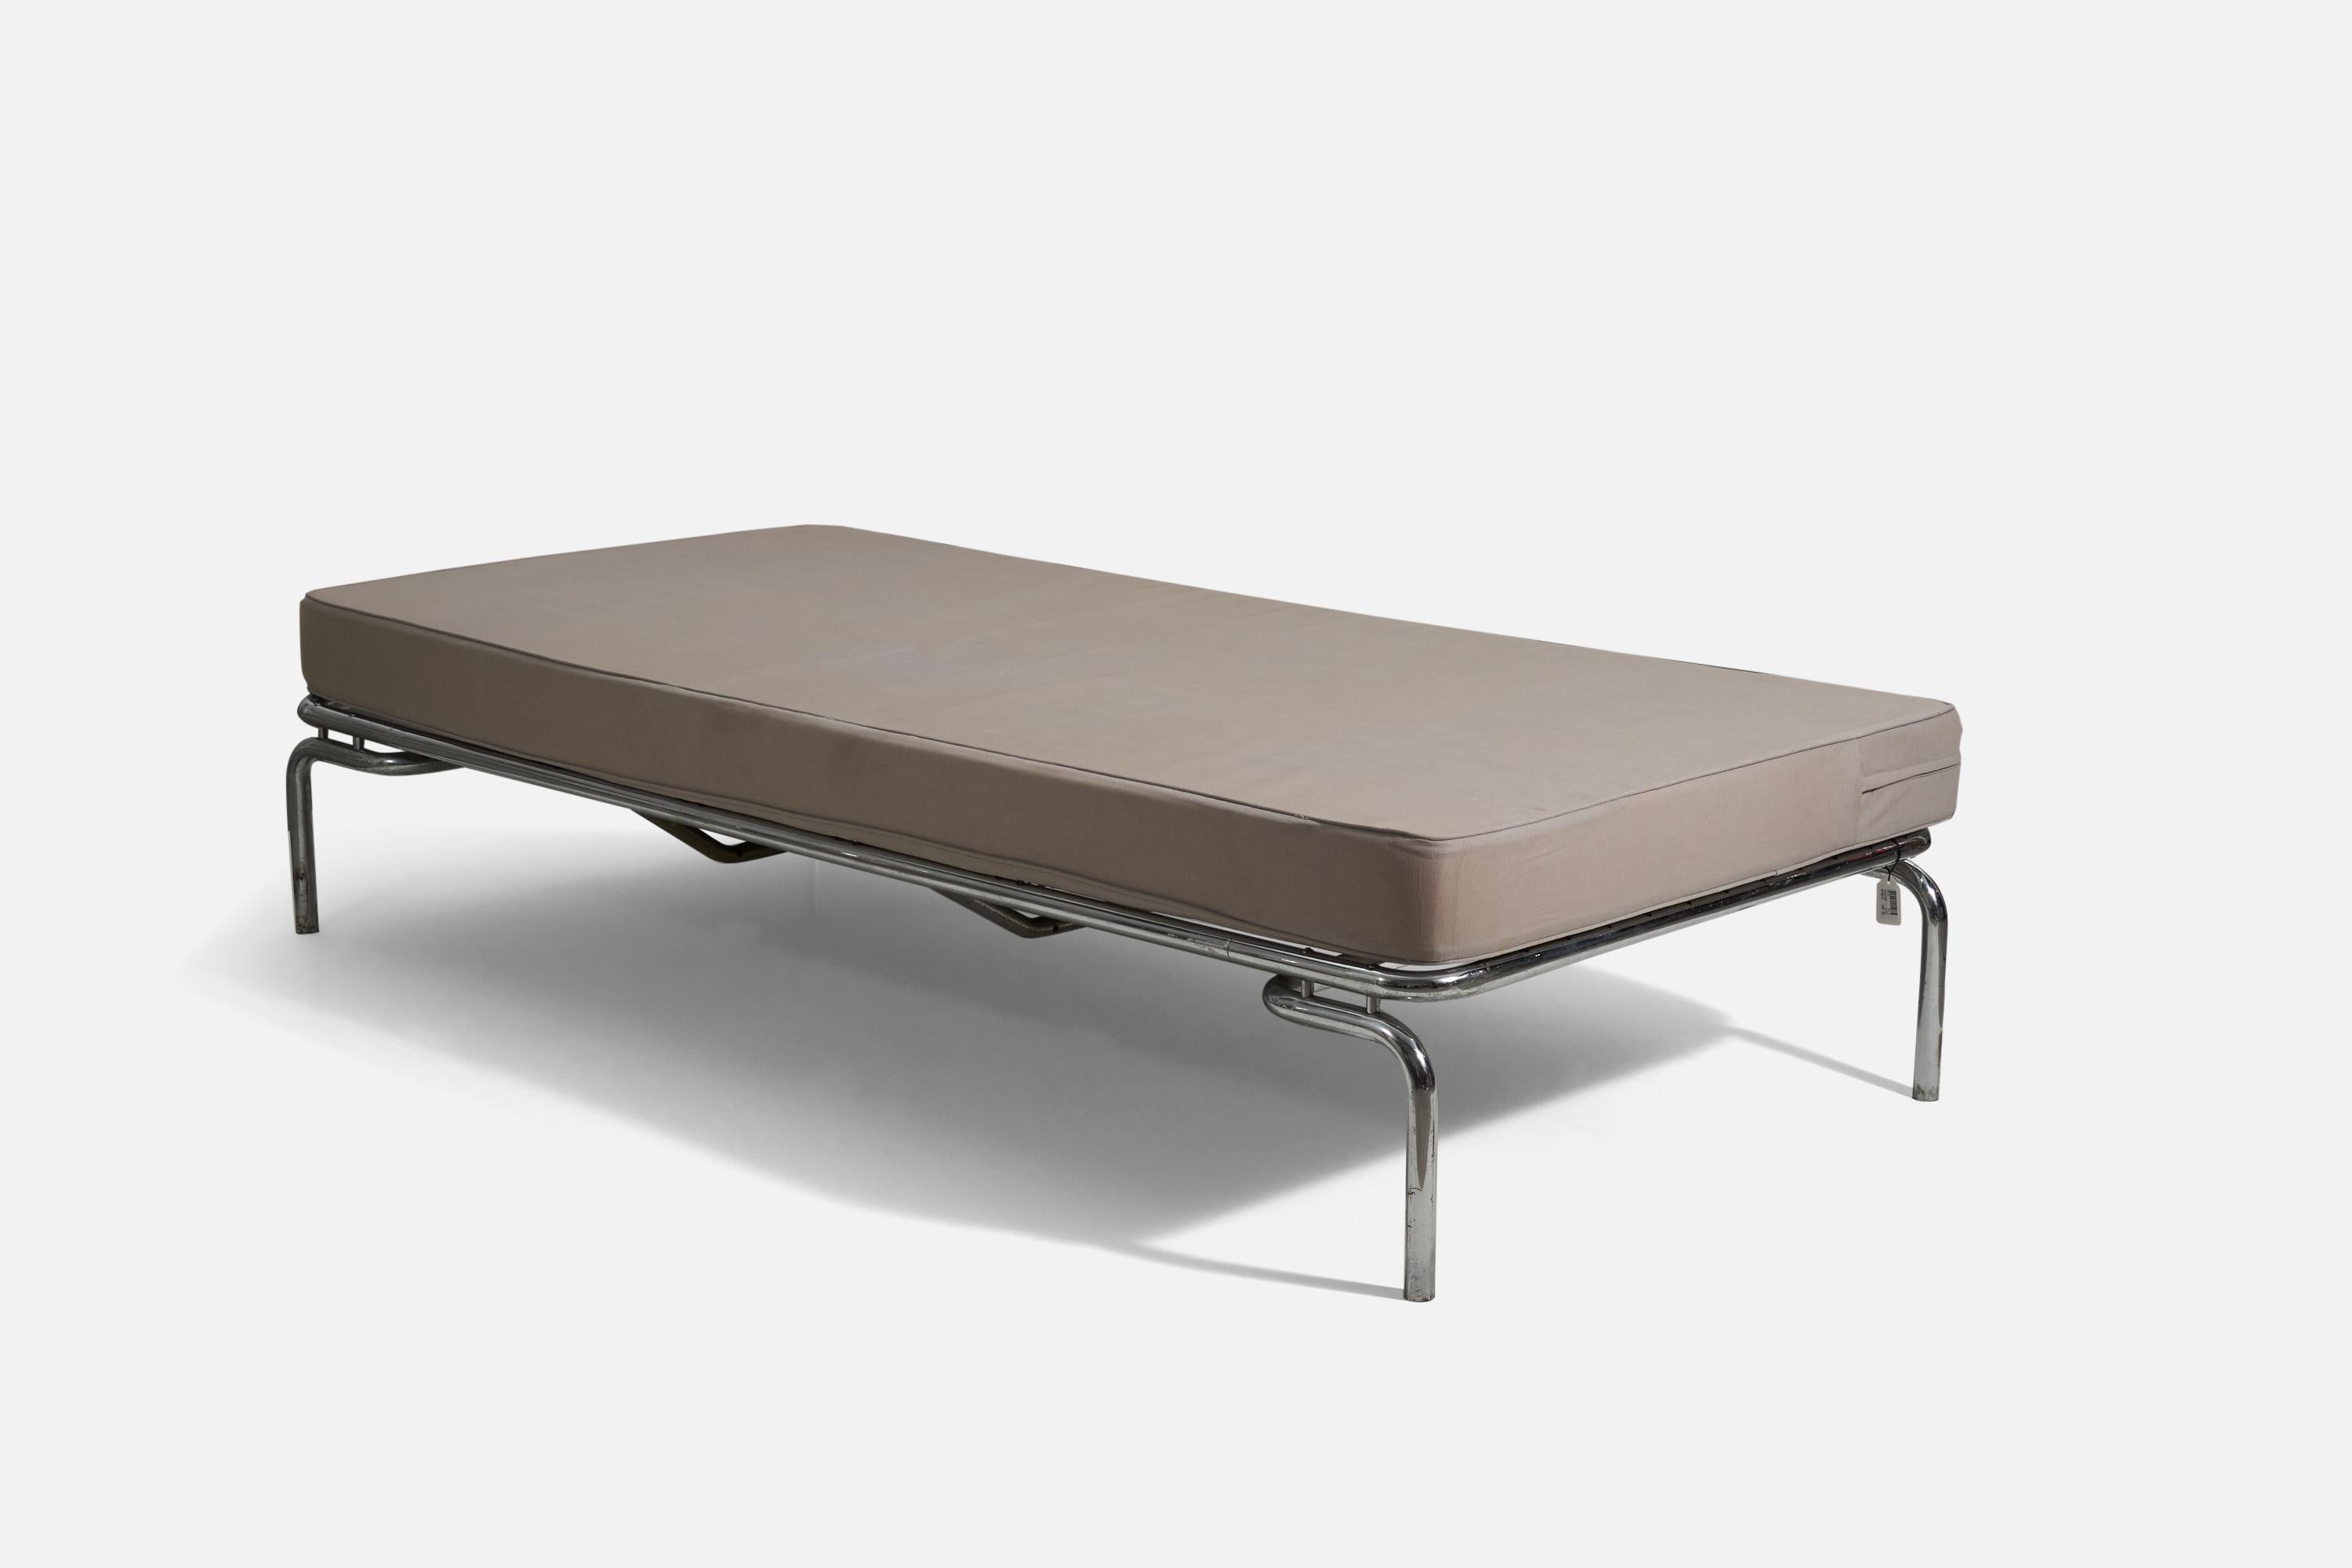 A steel and fabric daybed, by Marcel Breuer, Hungary, c. 1940.

Provenance
Gift of Miani Johnson to the Brooklyn Museum honoring the friendship between Marcel Breuer and Marian and Dan Johnson, 2010.